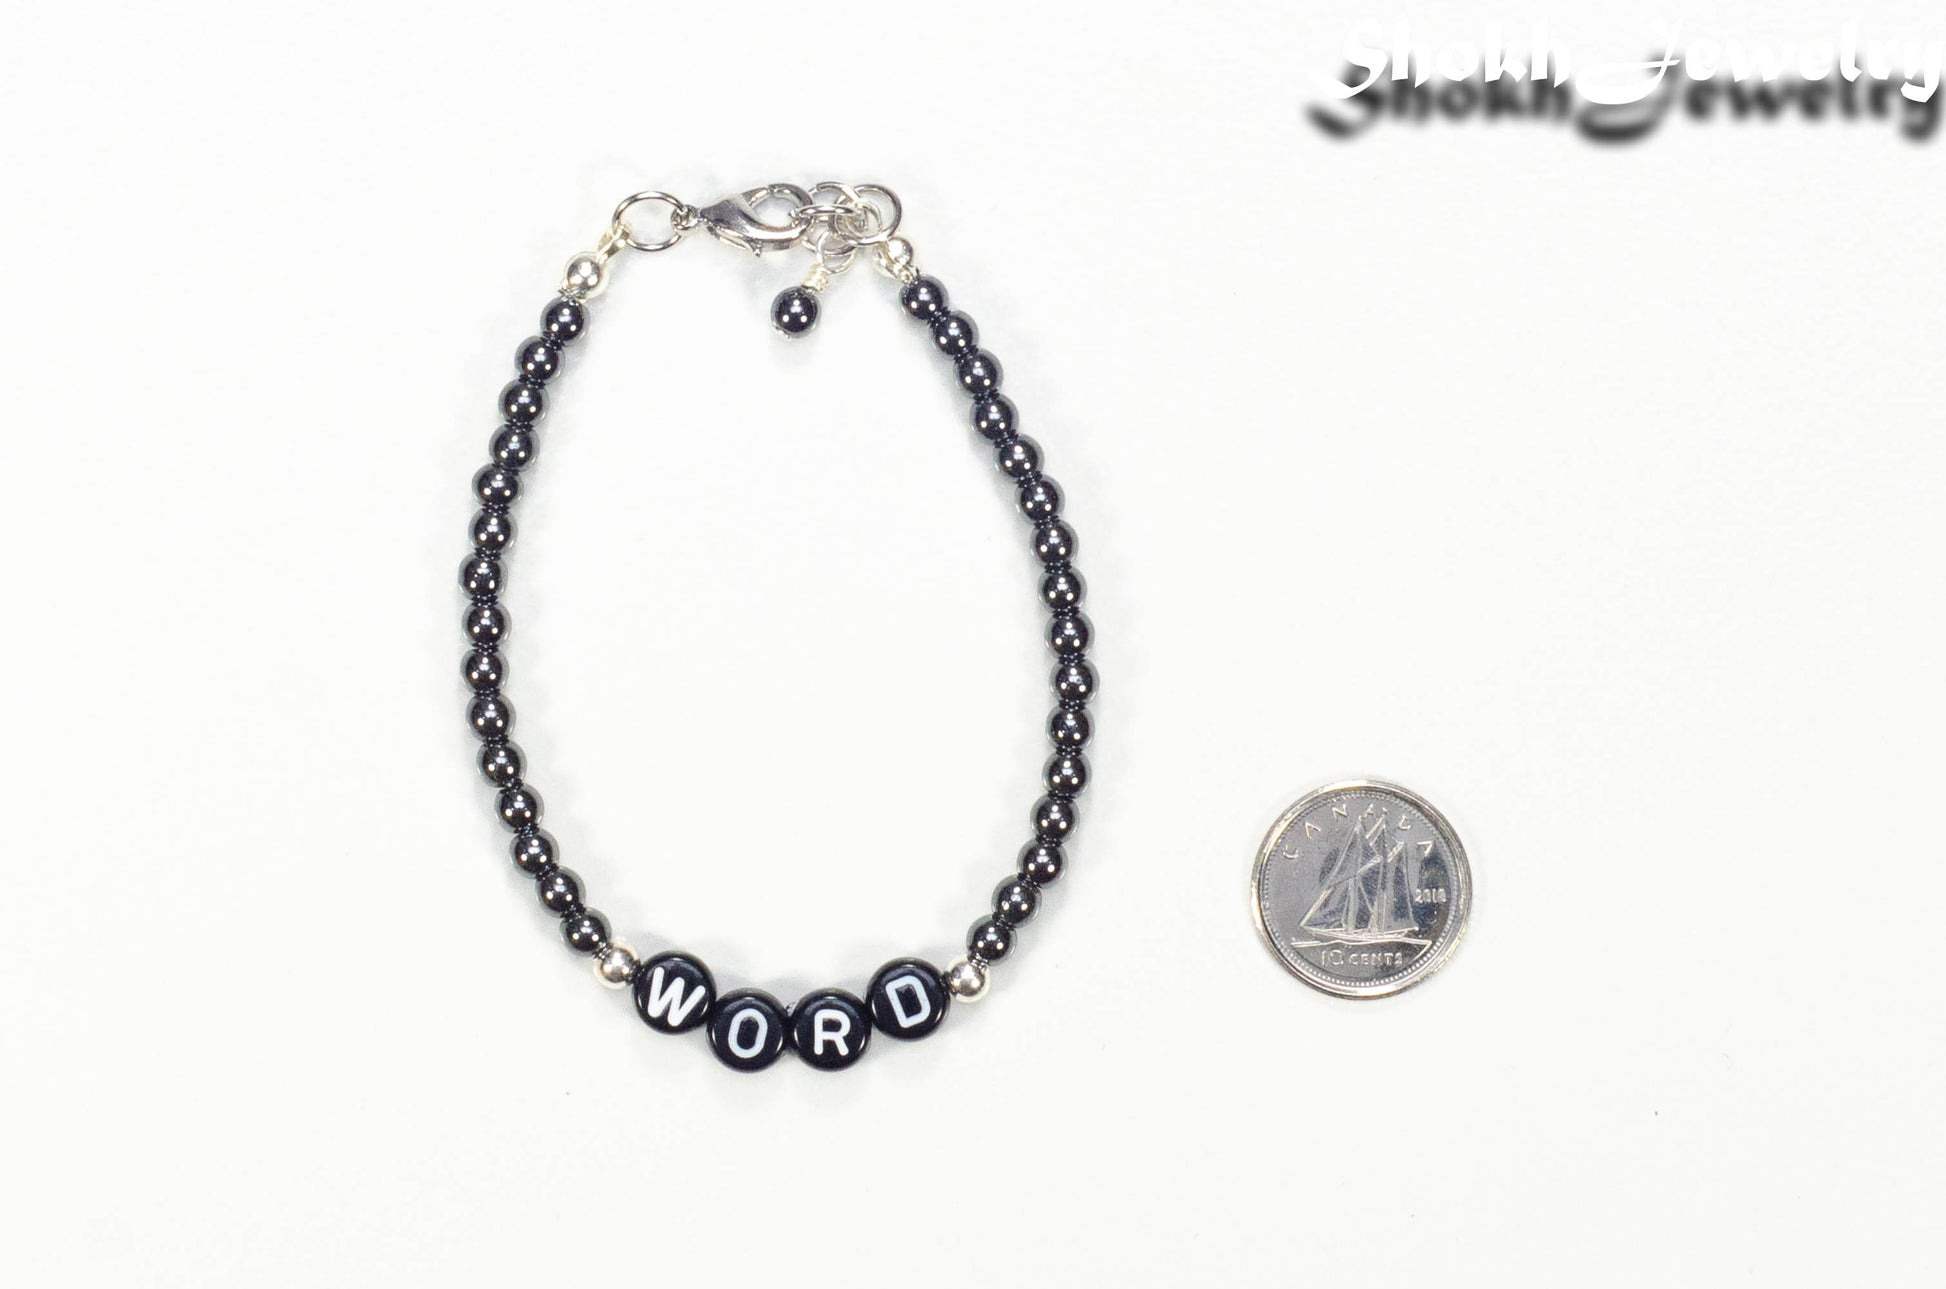 Personalized Hematite Stone Bracelet with Clasp beside a dime.